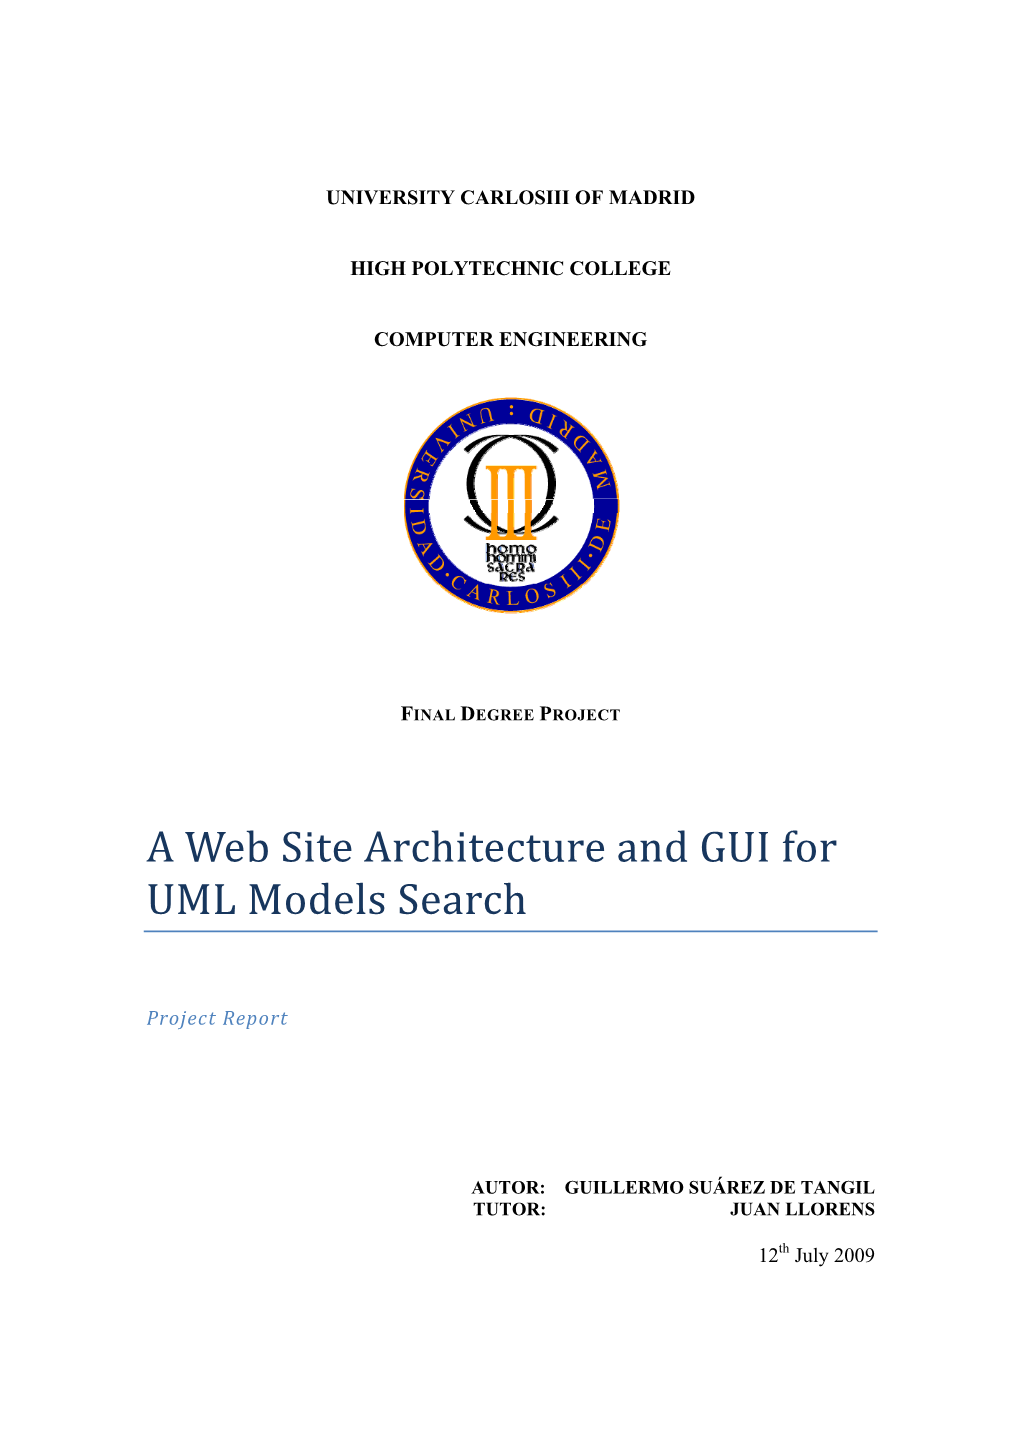 A Web Site Architecture and GUI for UML Models Search